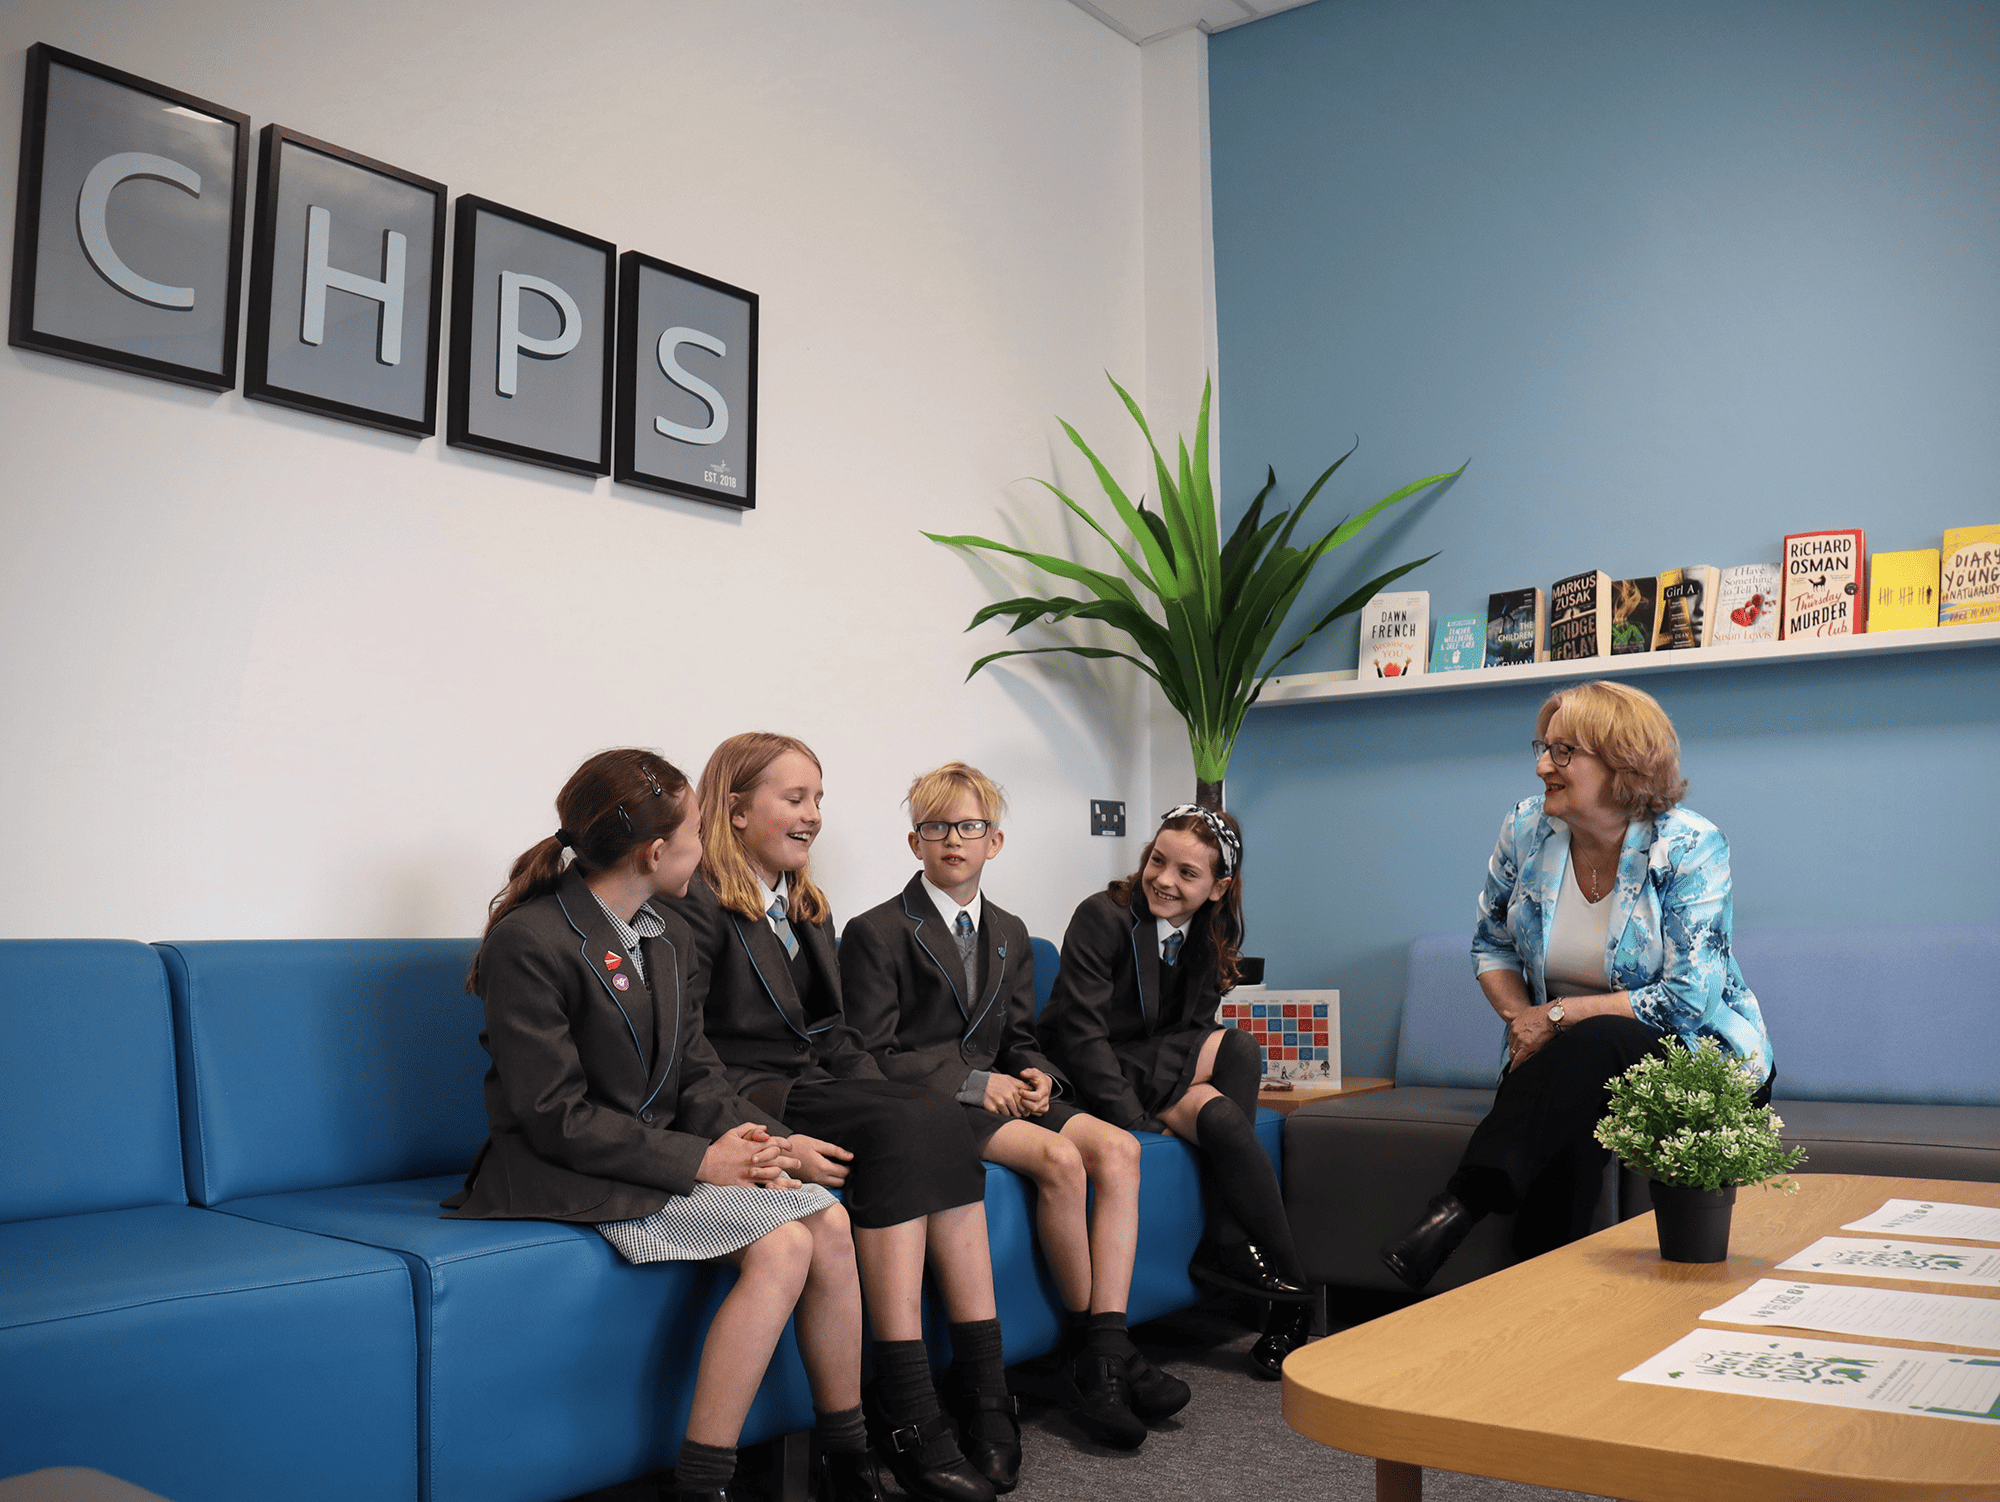 Pupils sat with Mary Robinson MP discussing their life at Cheadle Hulme Primary School